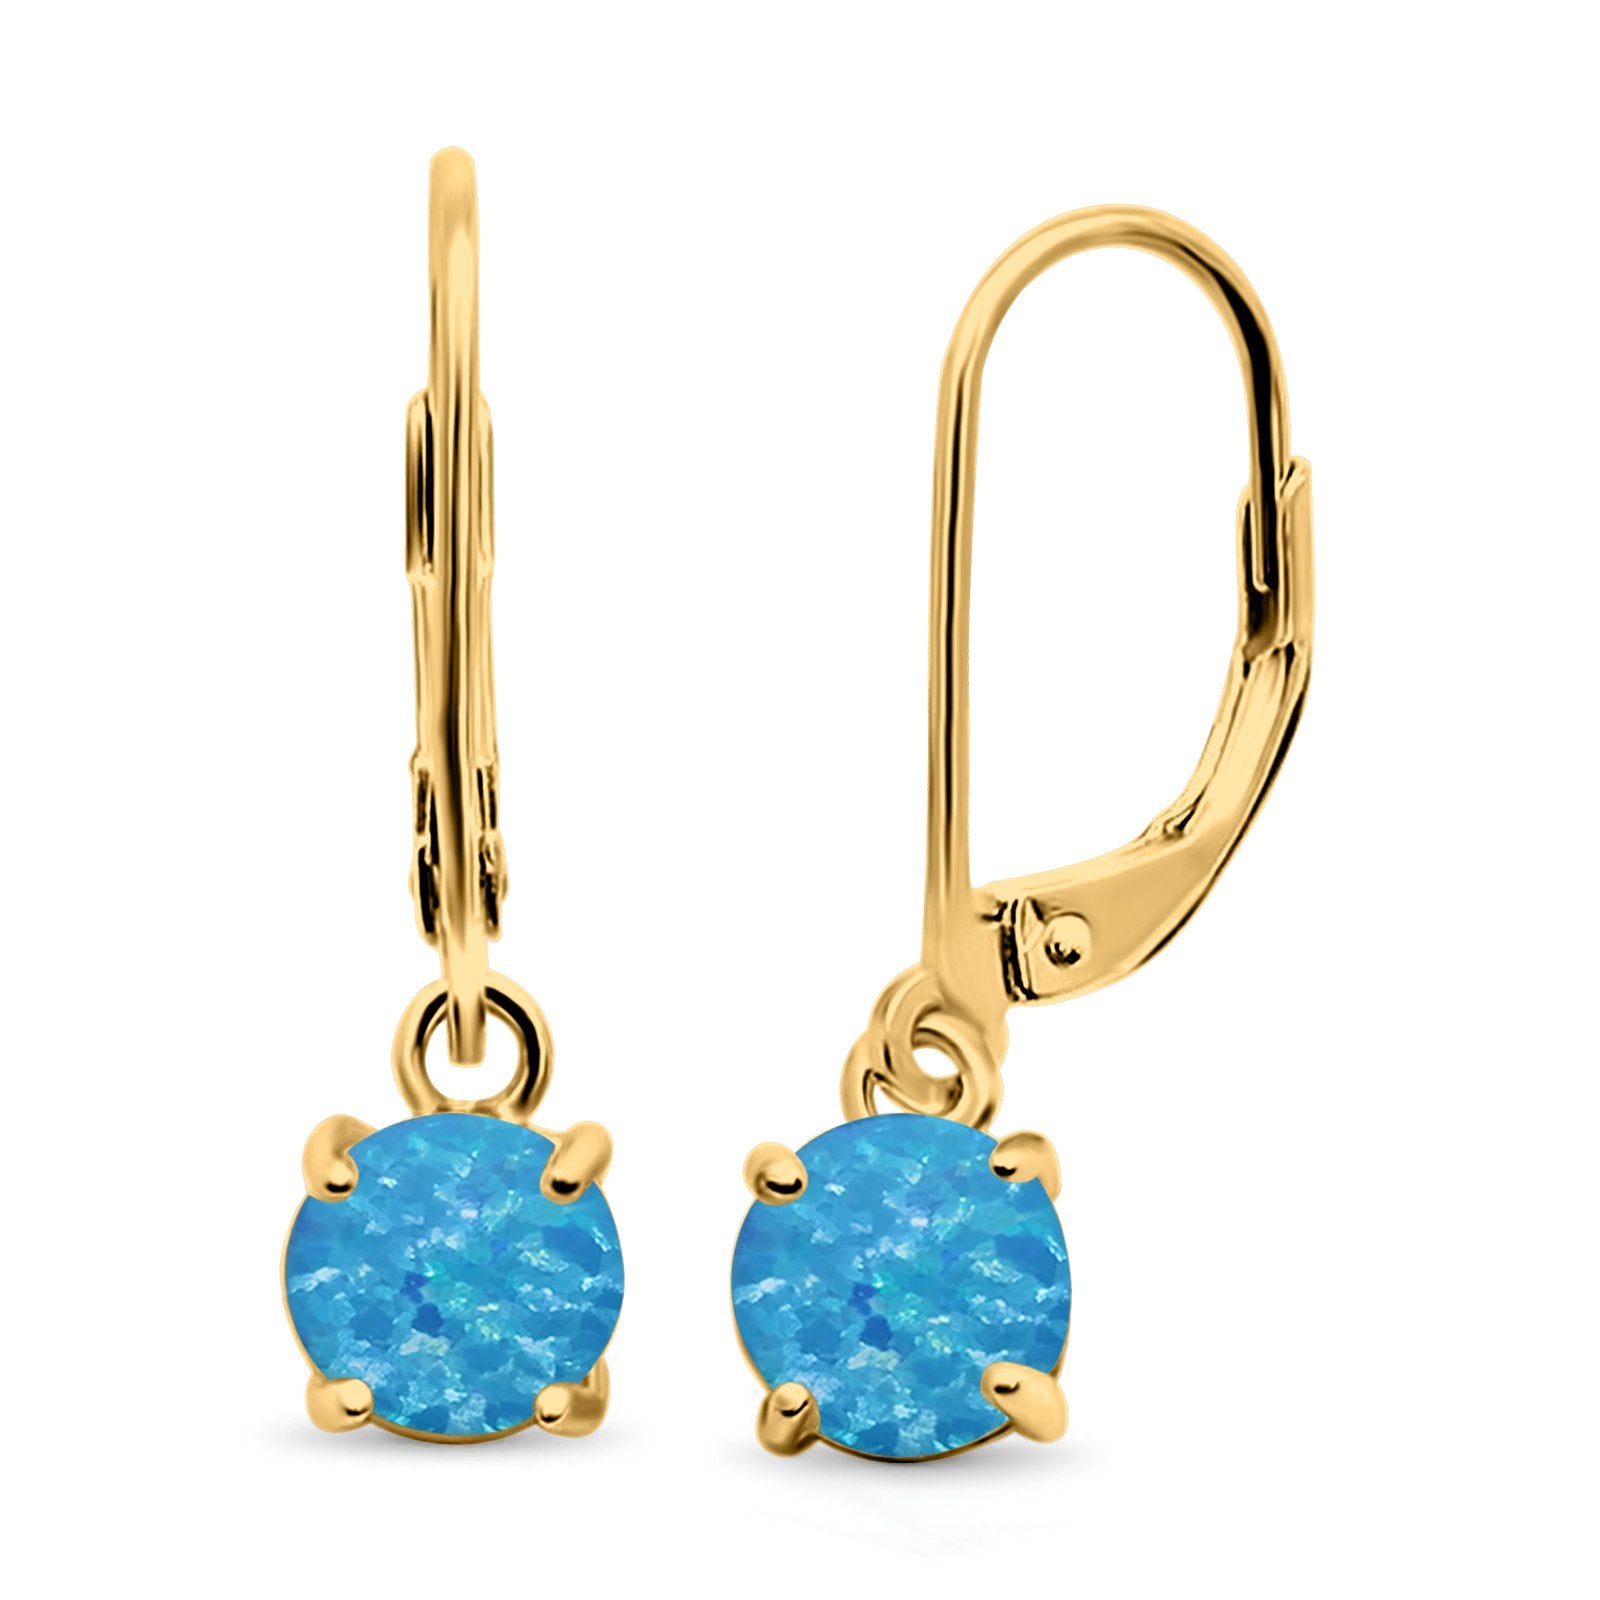 Round Yellow Tone, Lab Created Blue Opal Leverback Earrings 925 Sterling Silver (25.4mm)